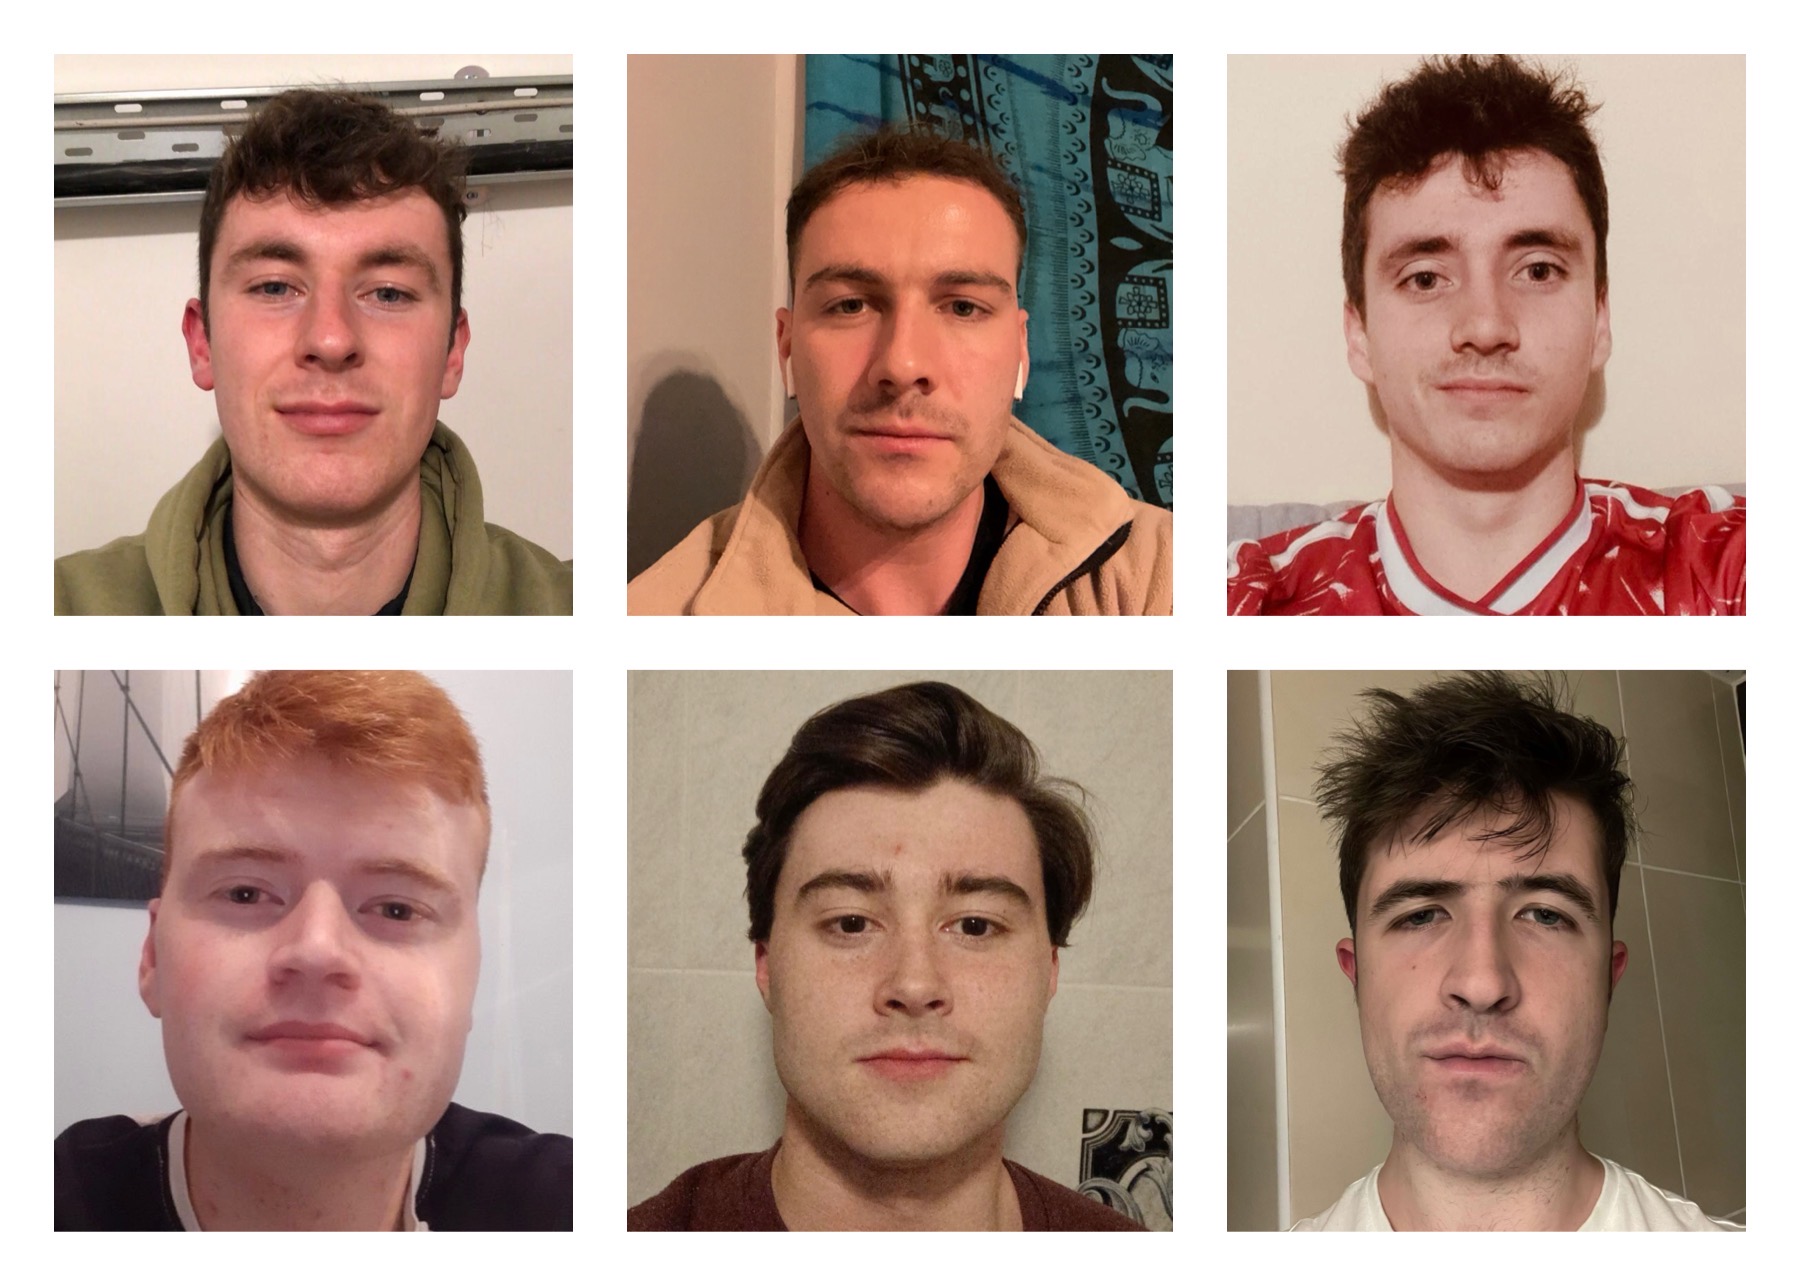 Movember 2021 - Limerick lads Aaron Hackett, Iain Campbell, Robert Bourke, Conor Duignan, Caolan Parrott, and Darragh O'Flanagan are all taking part in Movember this year, where they’ll be growing out their moustaches and challenging themselves to move 60km throughout the month of November.